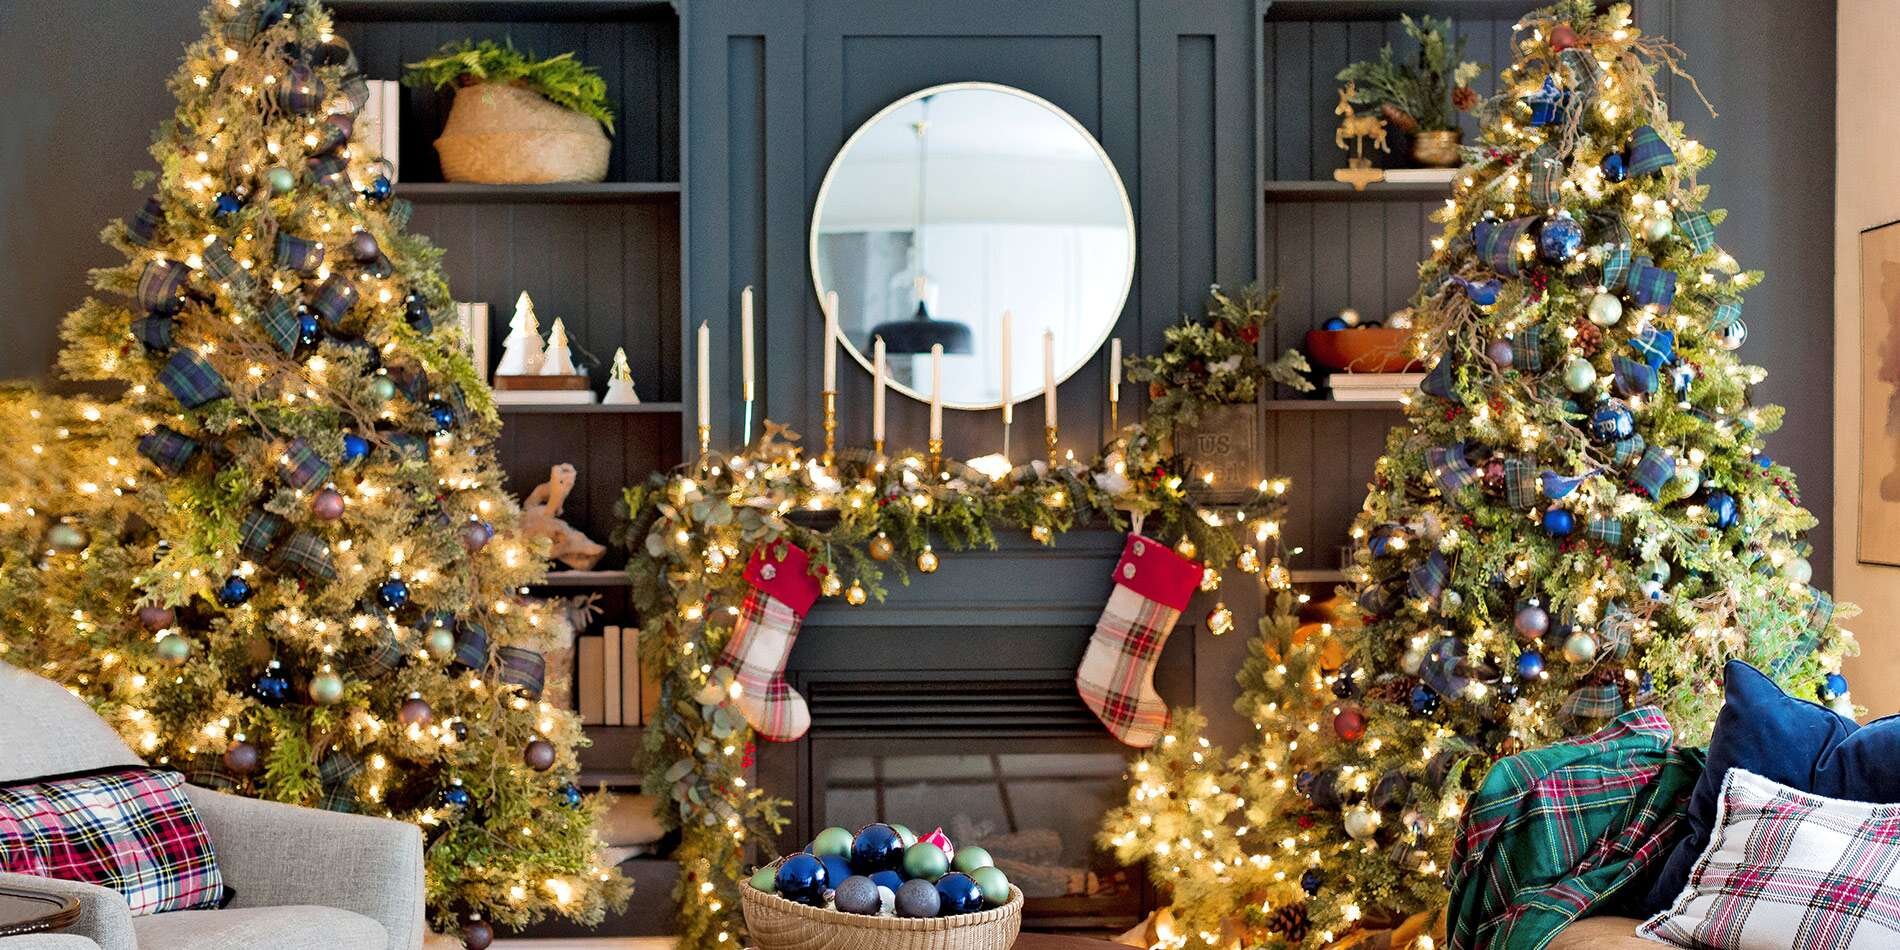 15 Ways to Decorate with Blue for Christmas